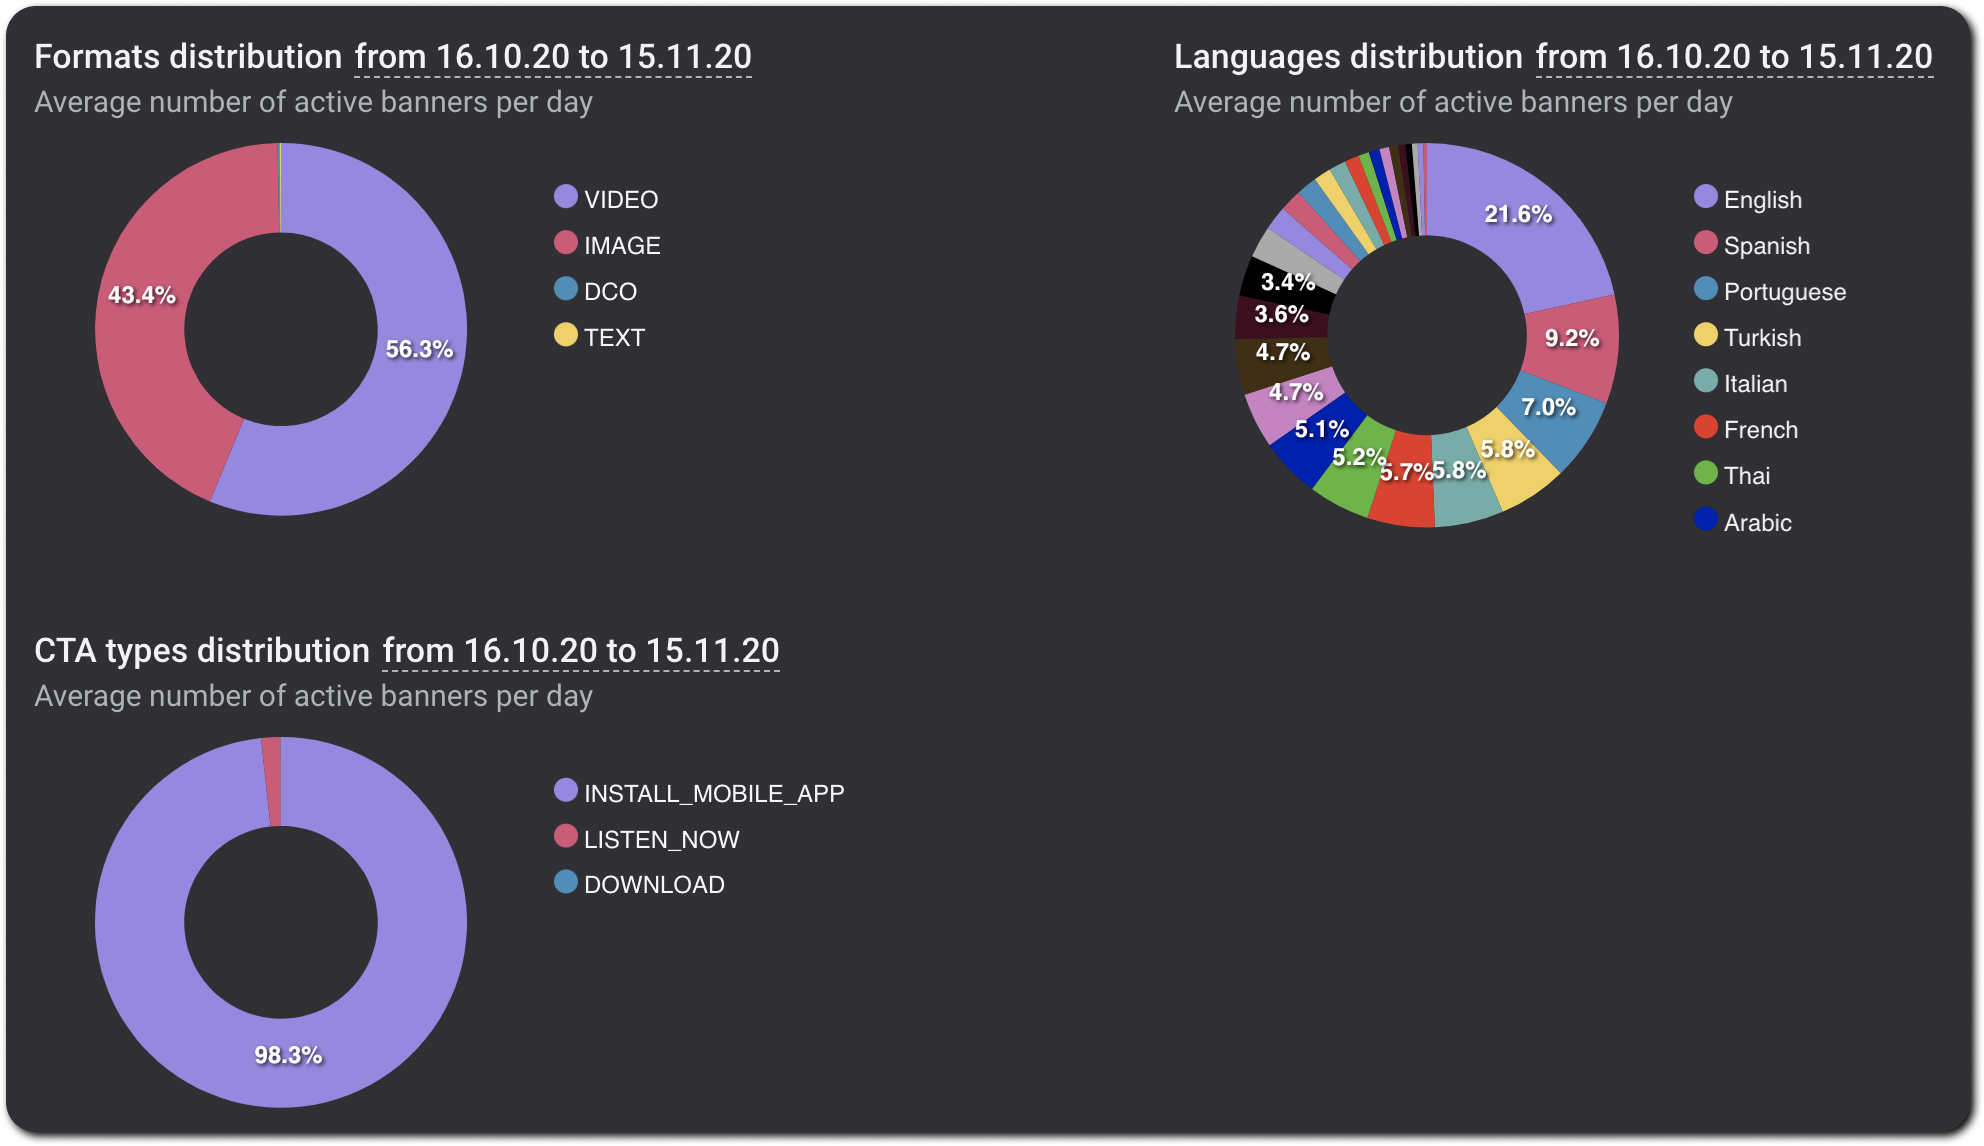 And distribution by formats, languages and call to action types.